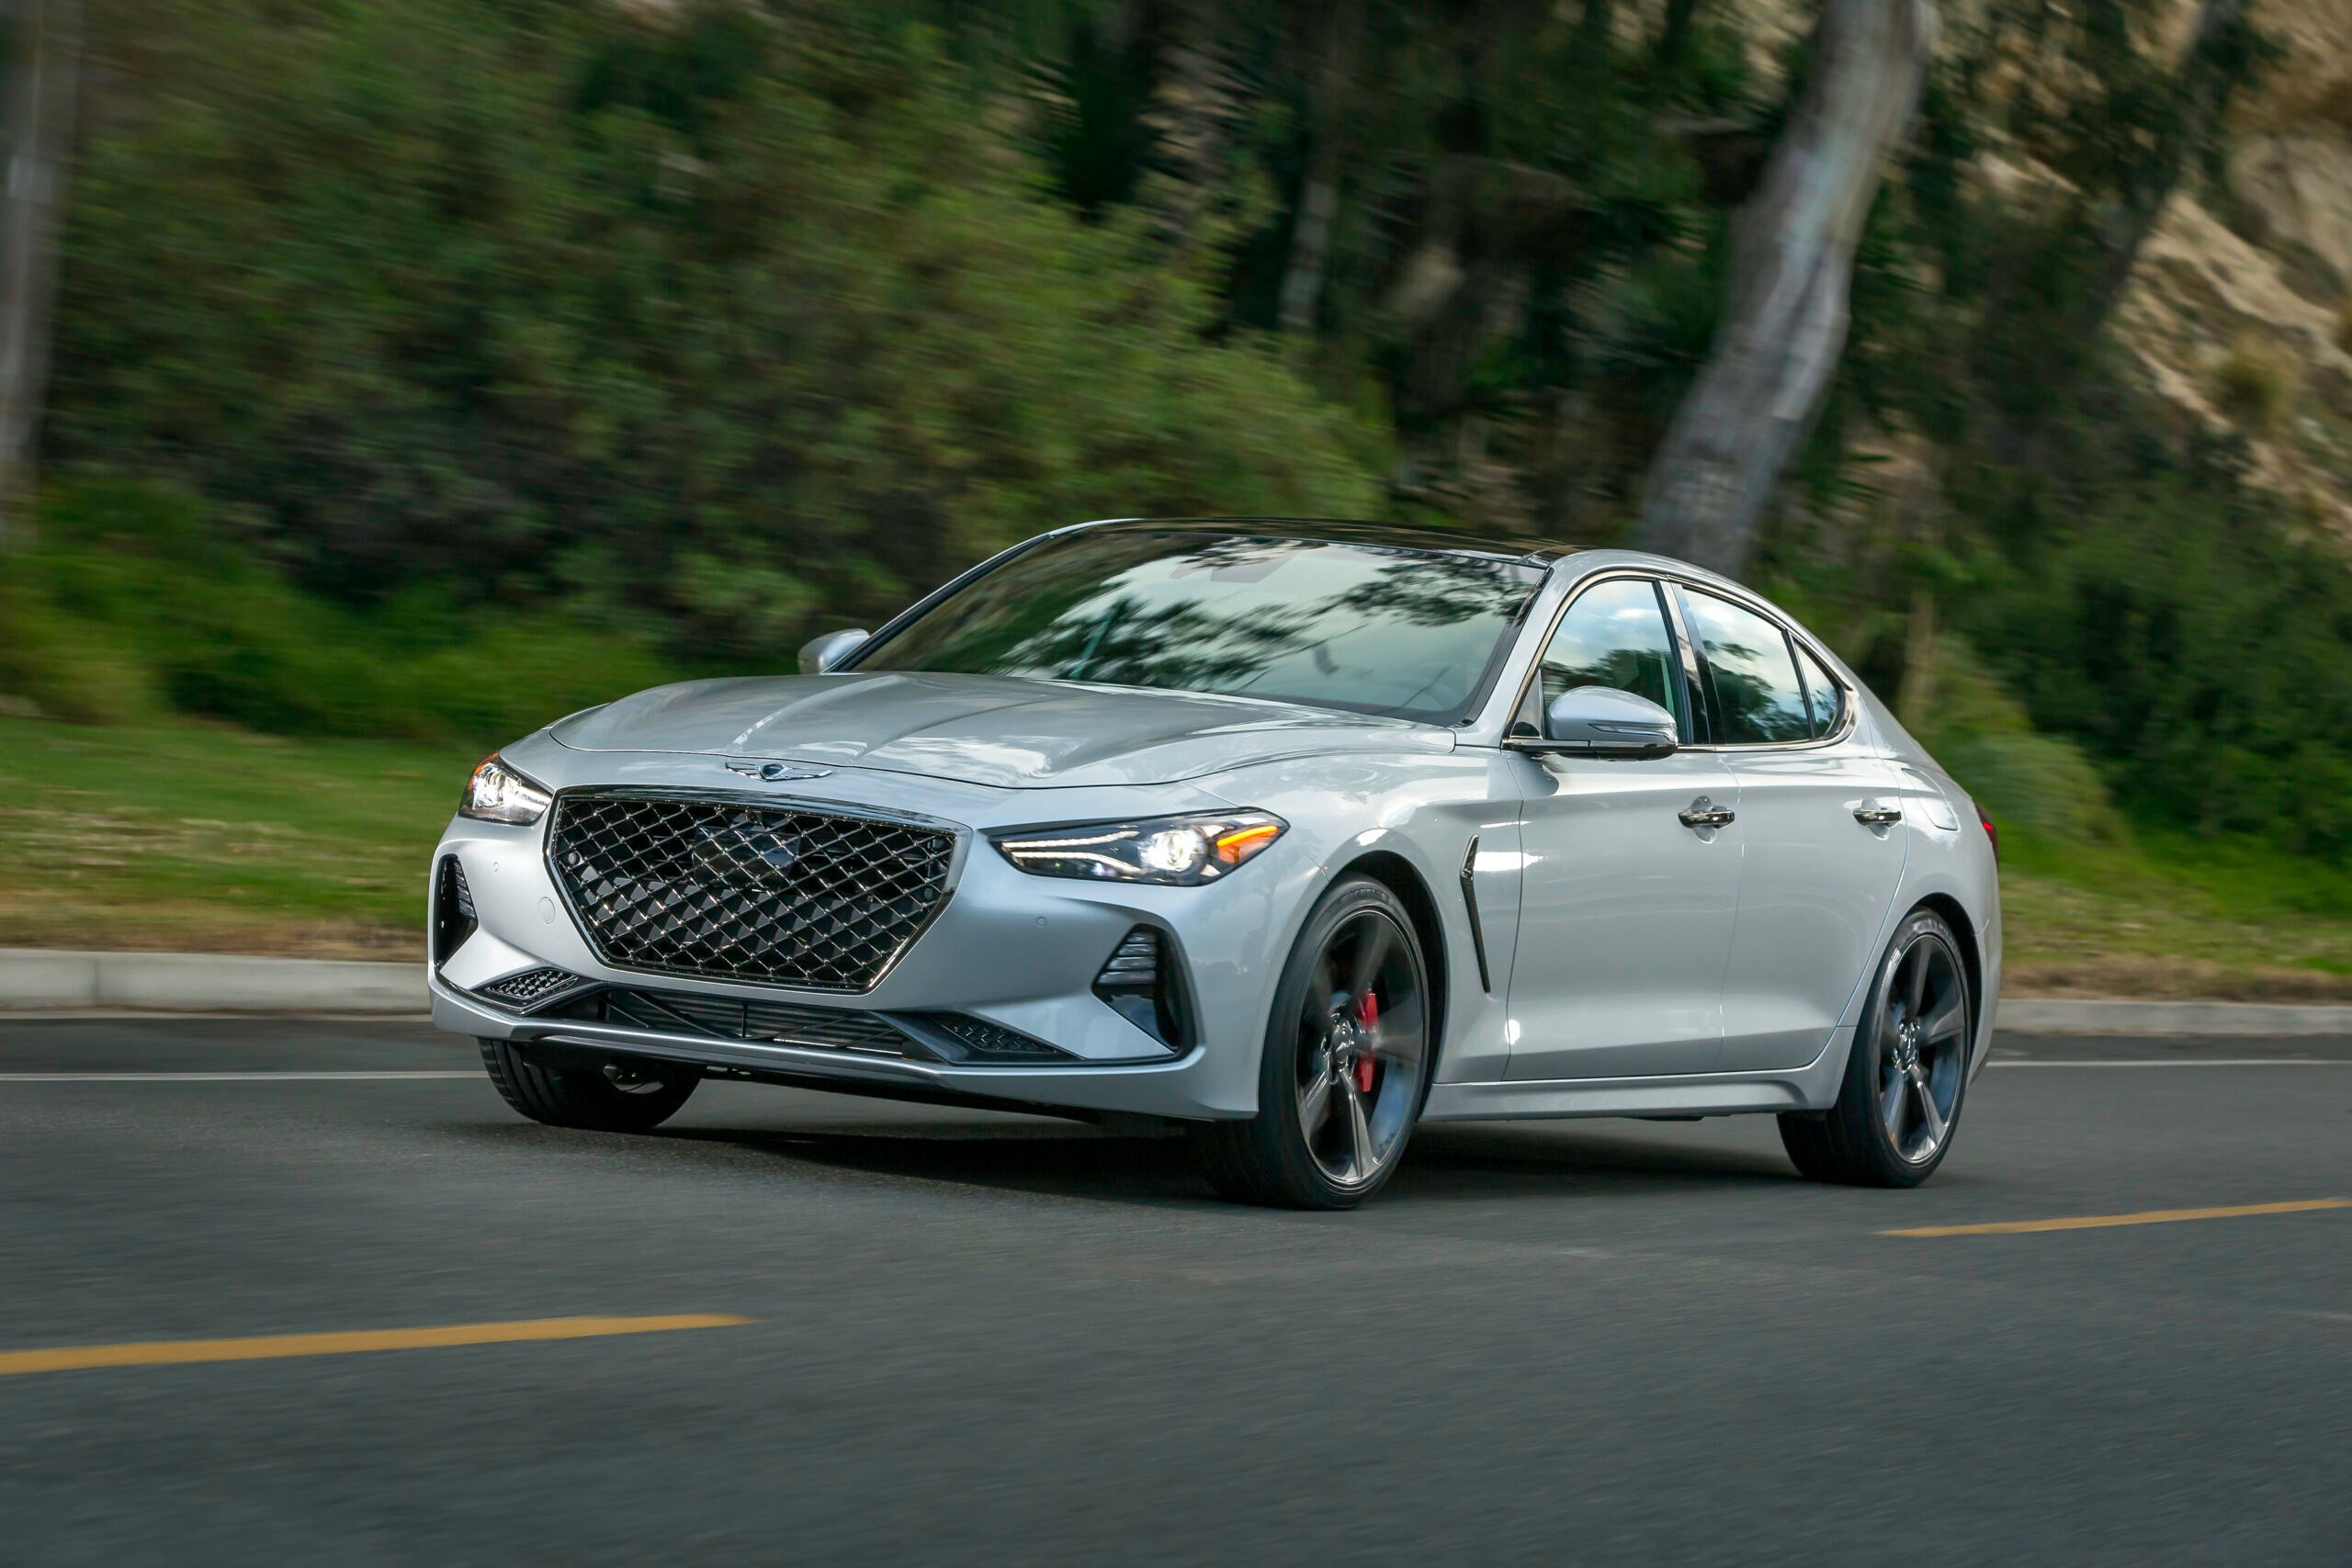 What The Experts Say About The 2019 Genesis G70